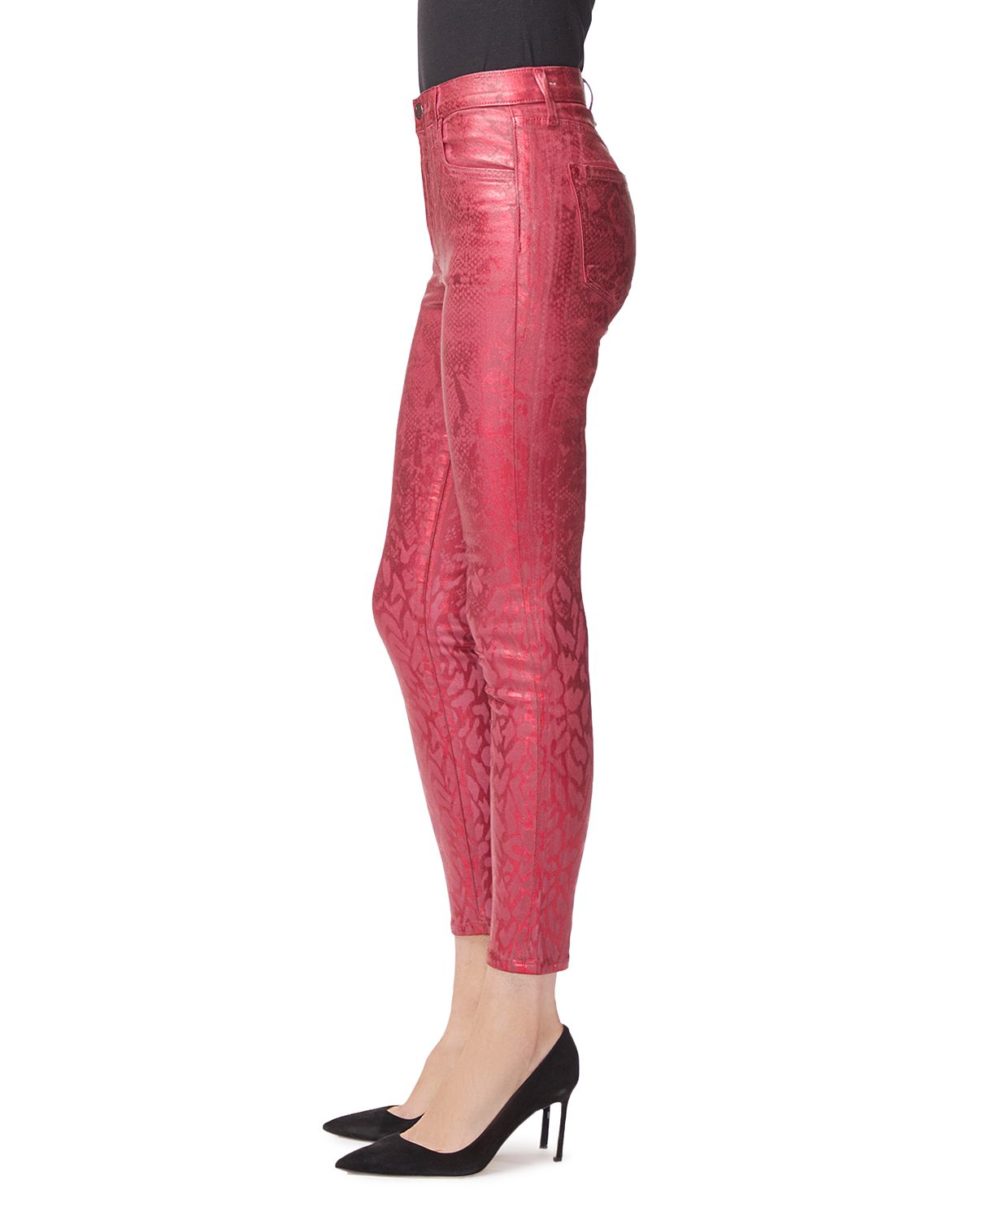 woocommerce-673321-2209615.cloudwaysapps.com-j-brand-womens-red-jagged-python-alana-skinny-ankle-jeans